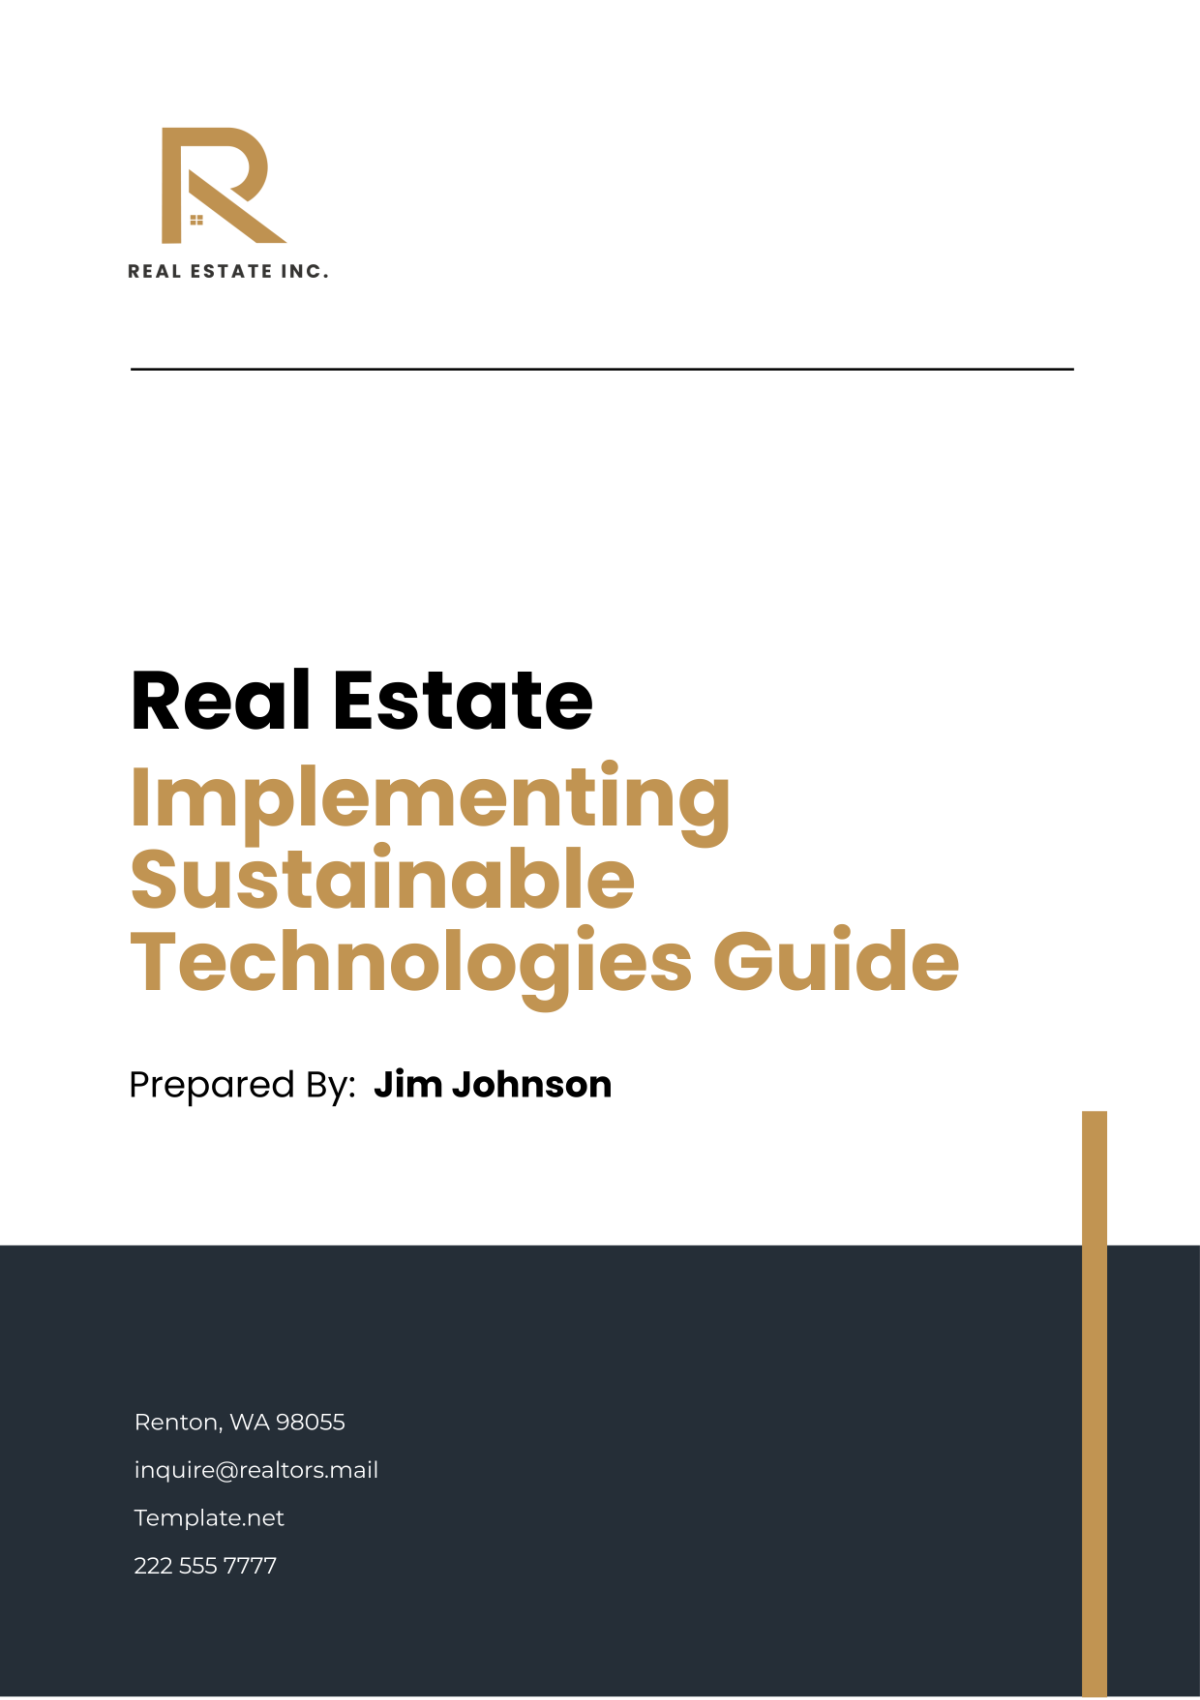 Real Estate Implementing Sustainable Technologies Guide Template